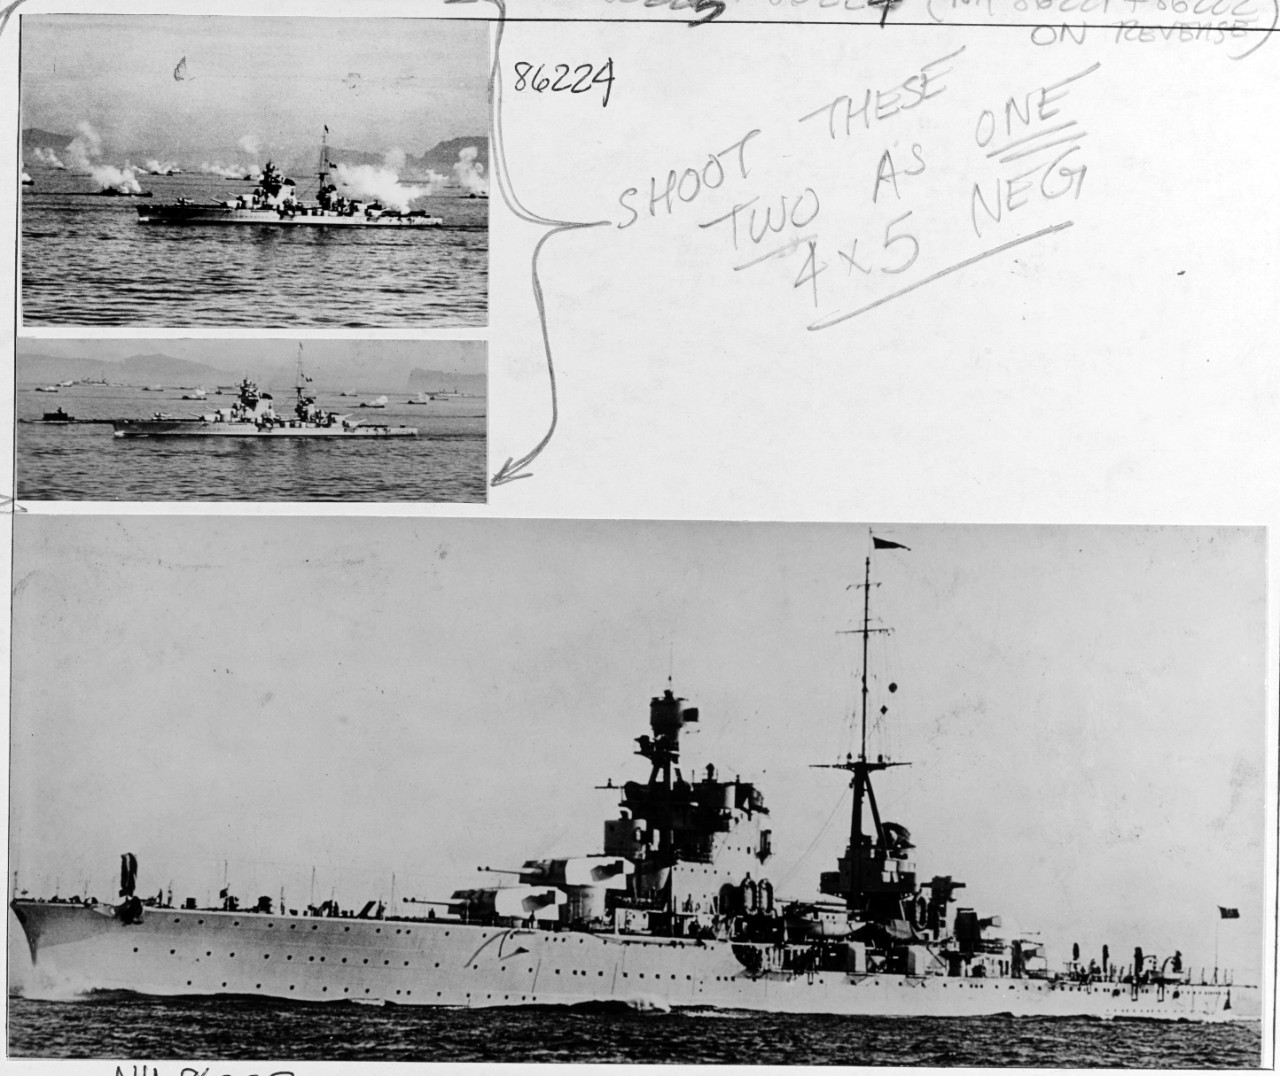 Two views of the Italian heavy cruiser POLA (1931-1941) at a 1938 review.